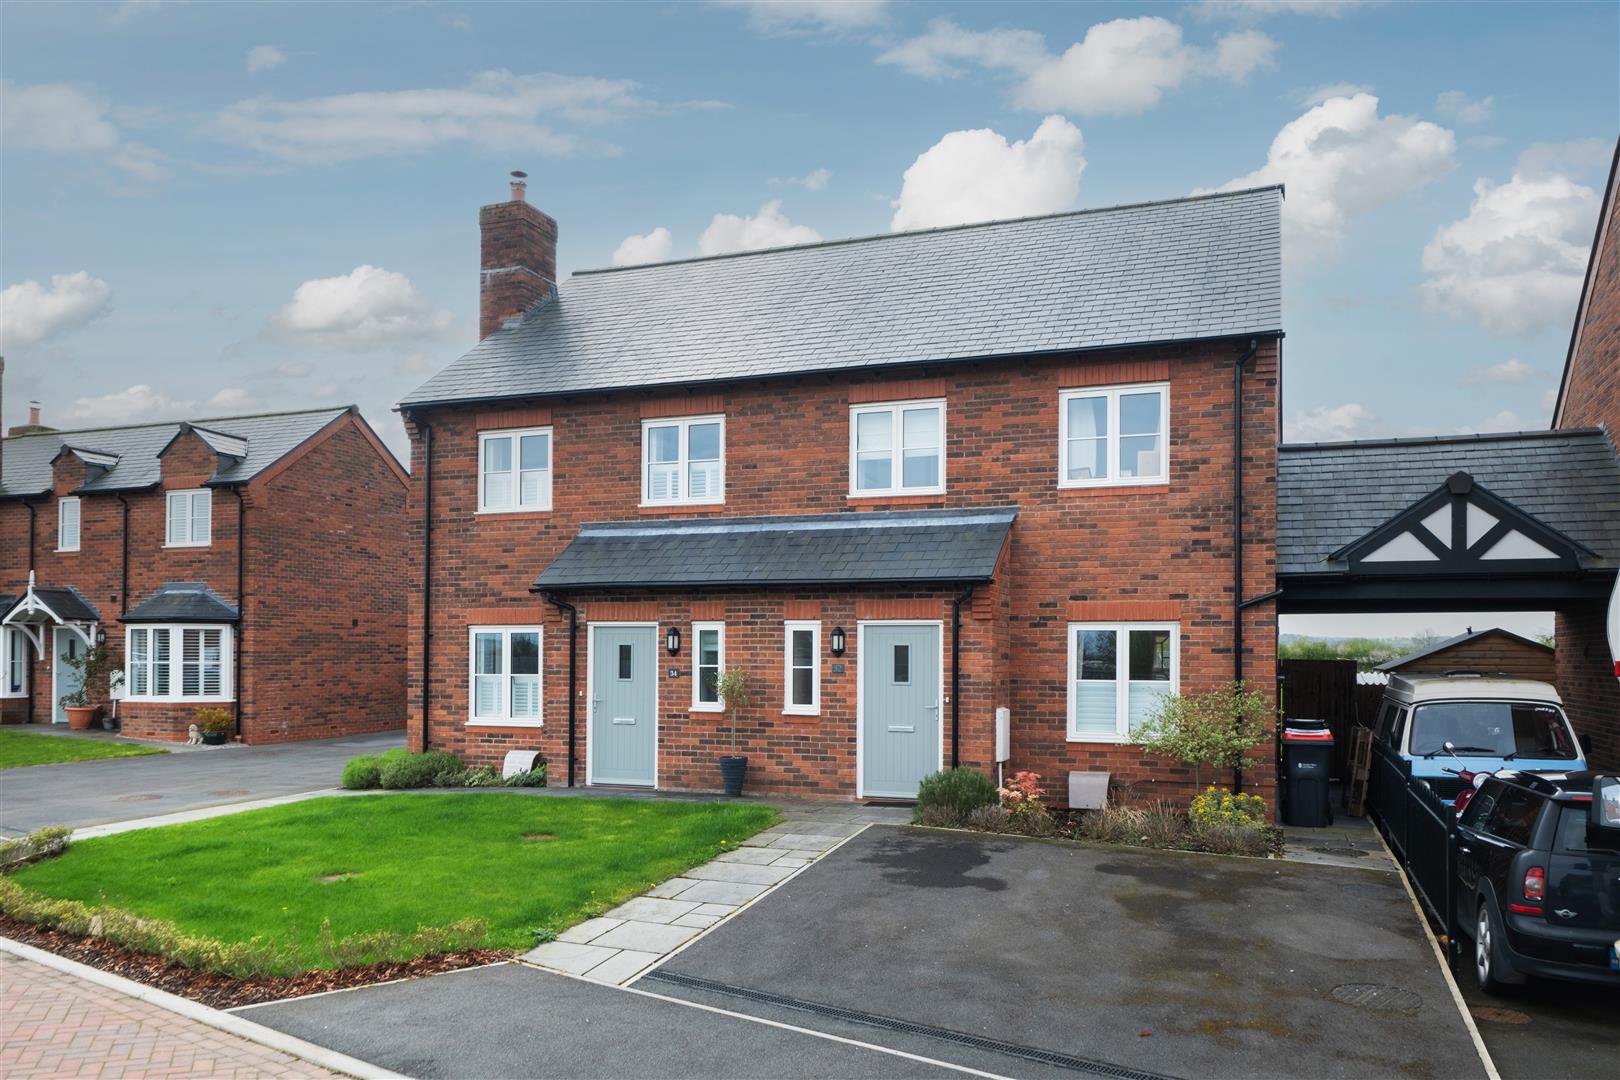 3 bedroom  Semi Detached House for Sale in Tattenhall